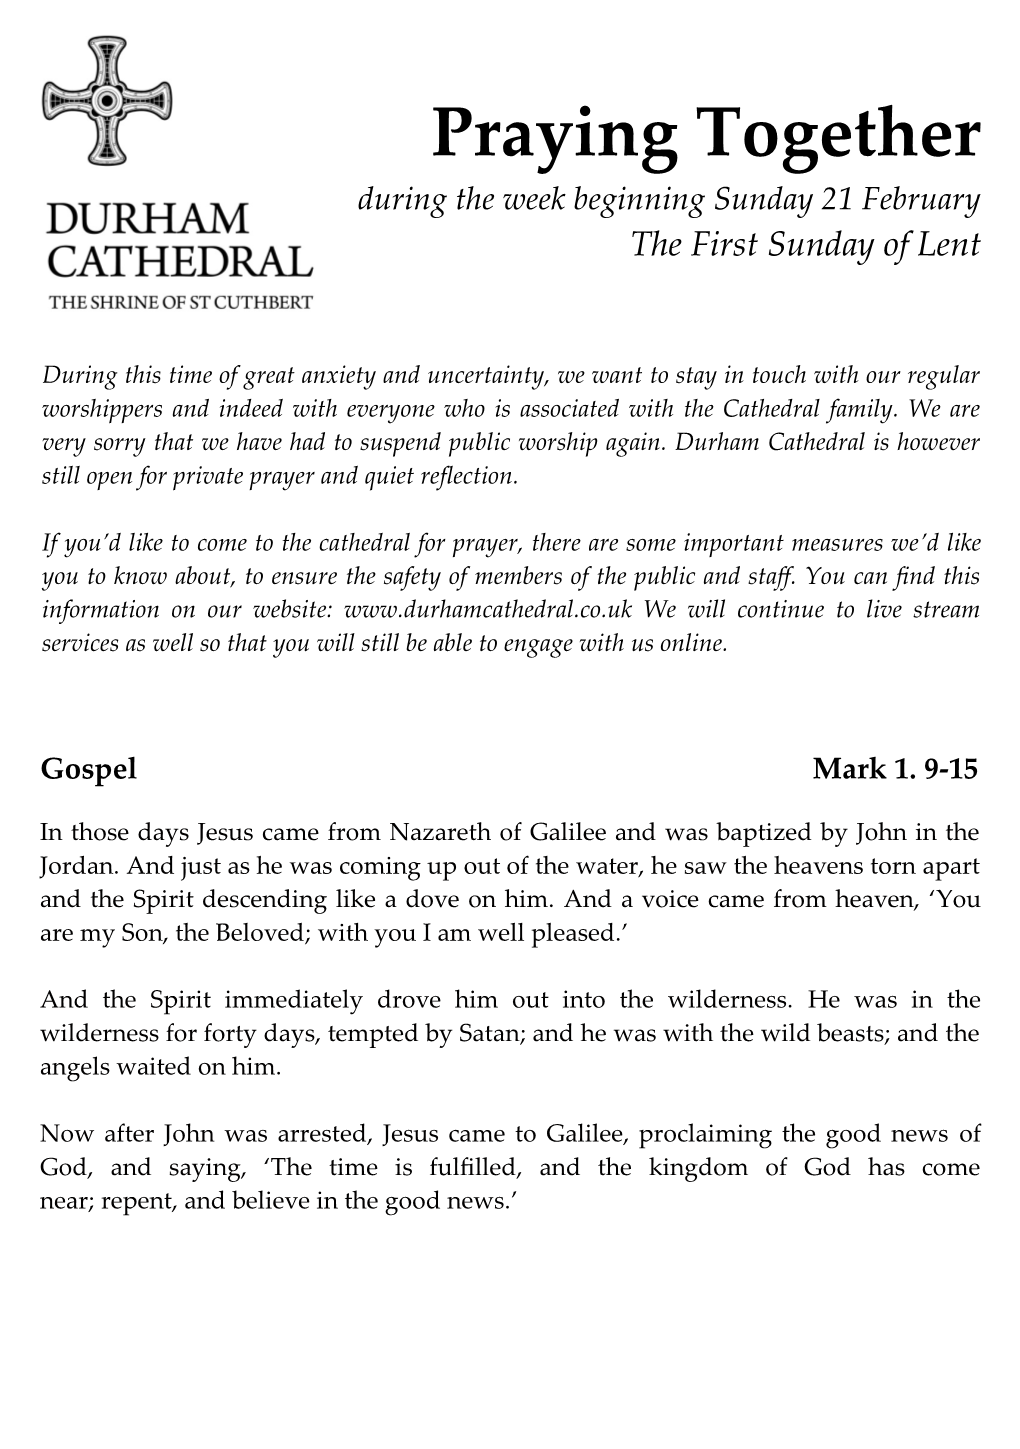 Praying Together During the Week Beginning Sunday 21 February the First Sunday of Lent